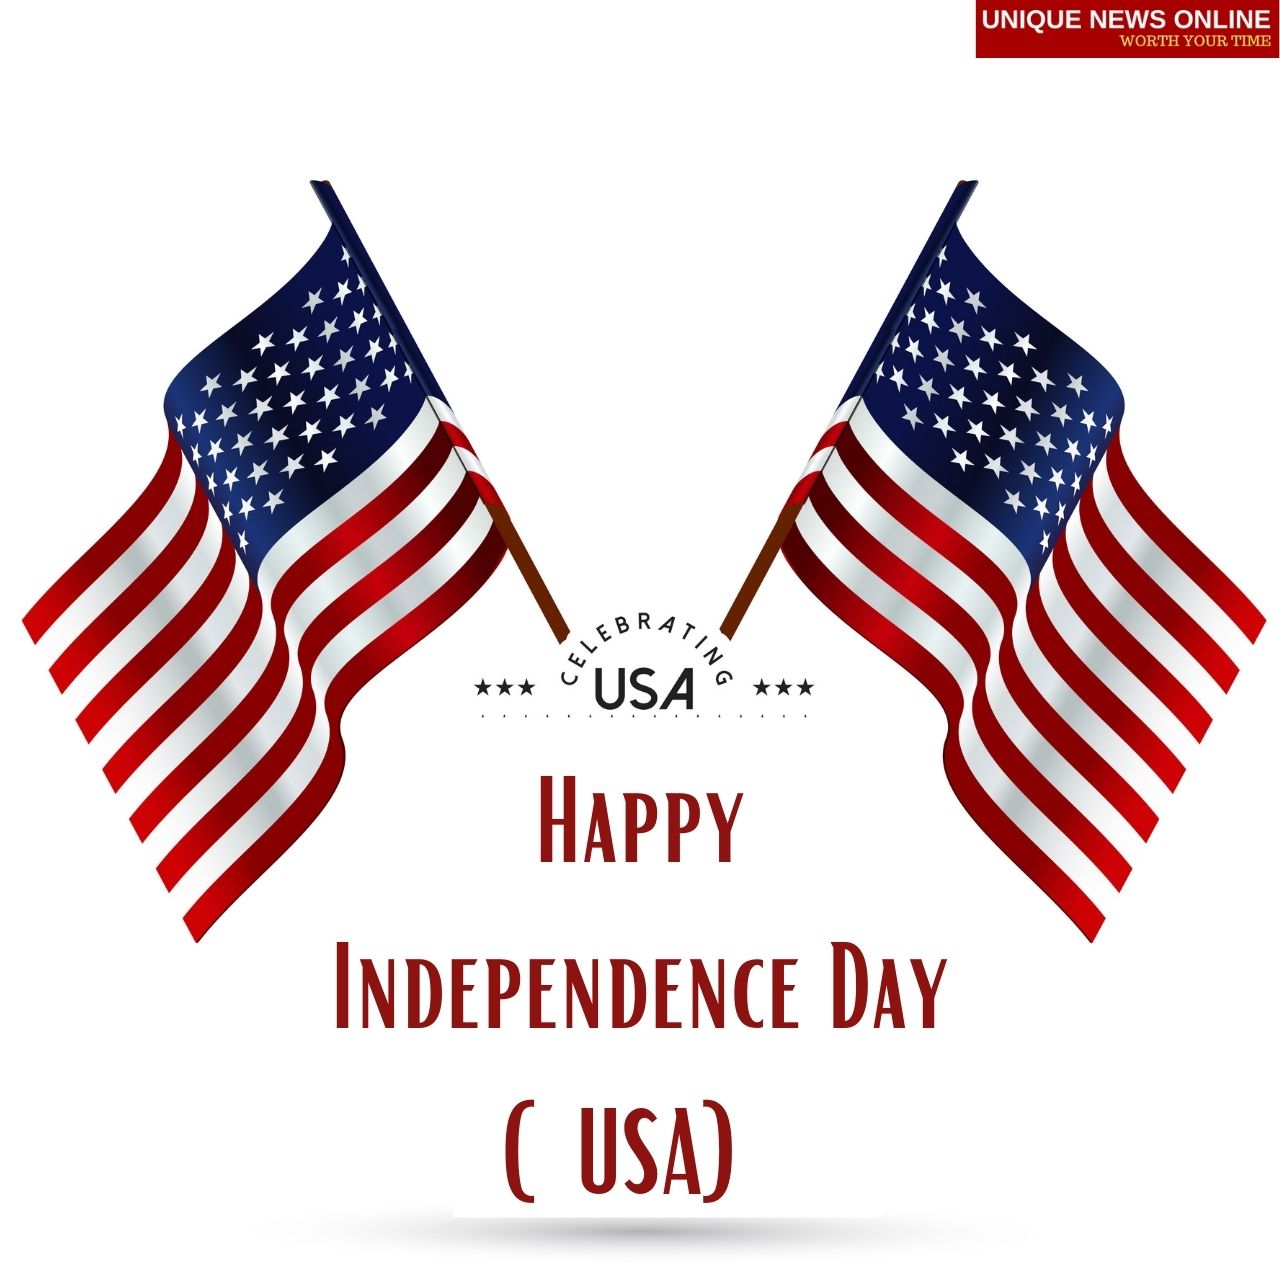 Independence Day (USA) 2021: WhatsApp Status Video to download to celebrate American Independence Day